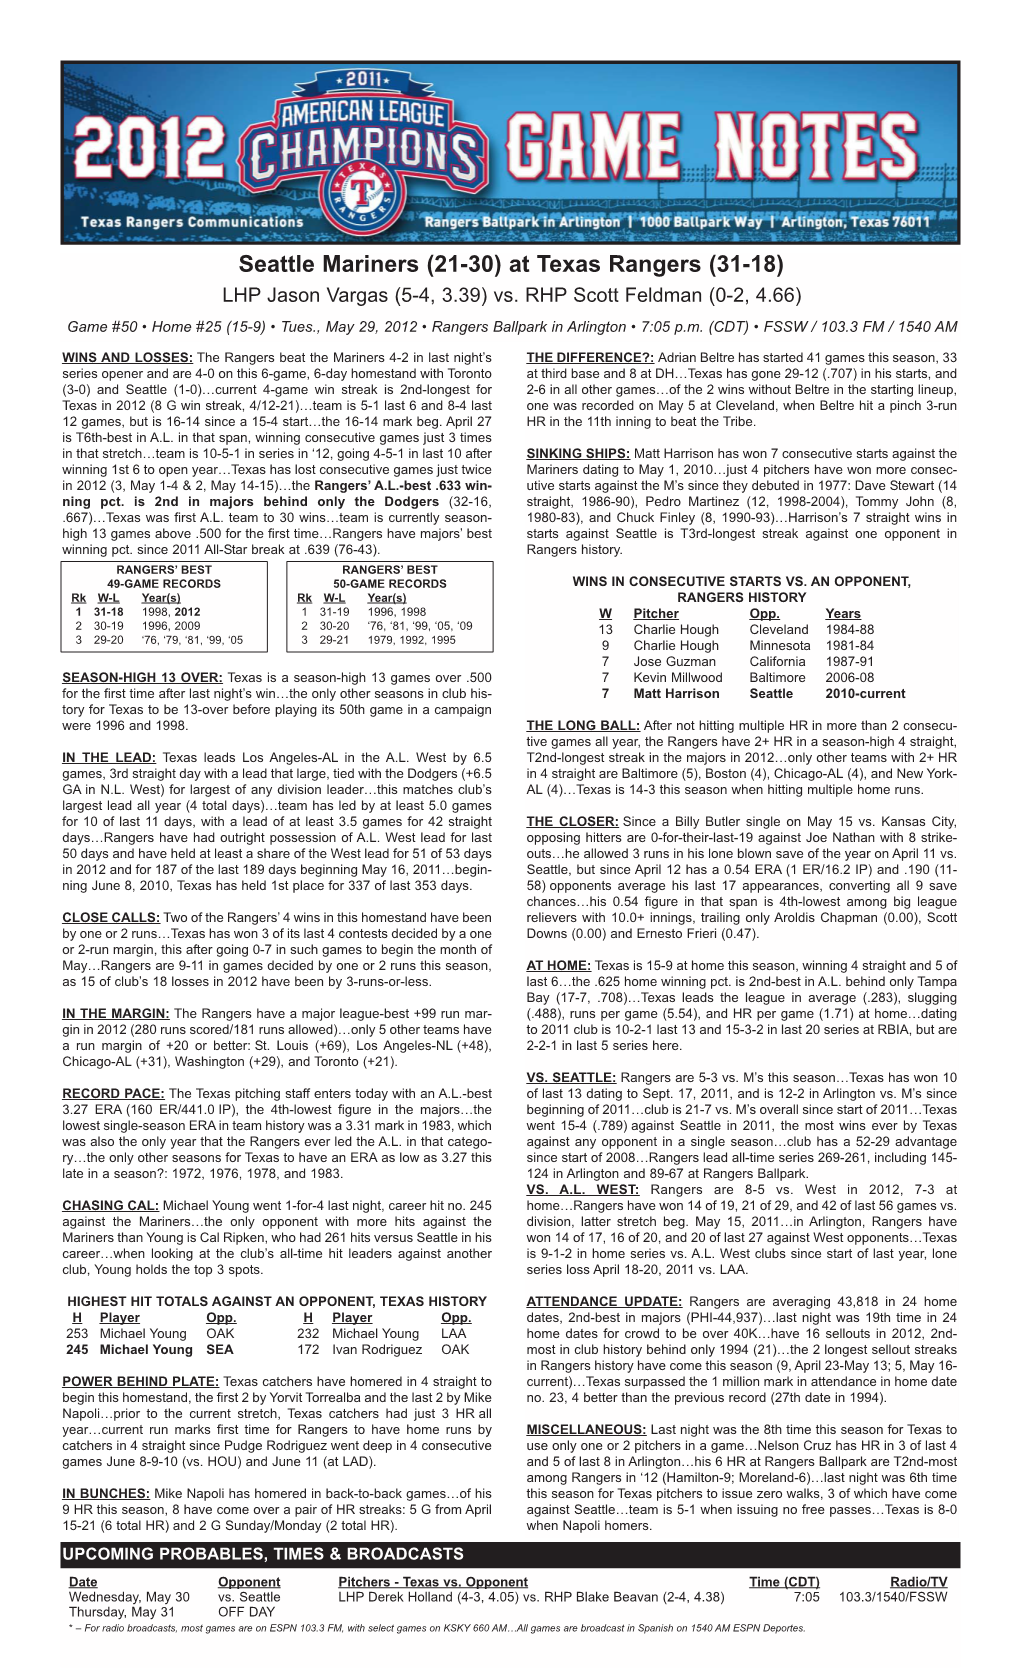 Rangers Game Notes • Tuesday, May 29, 2012 • Seattle